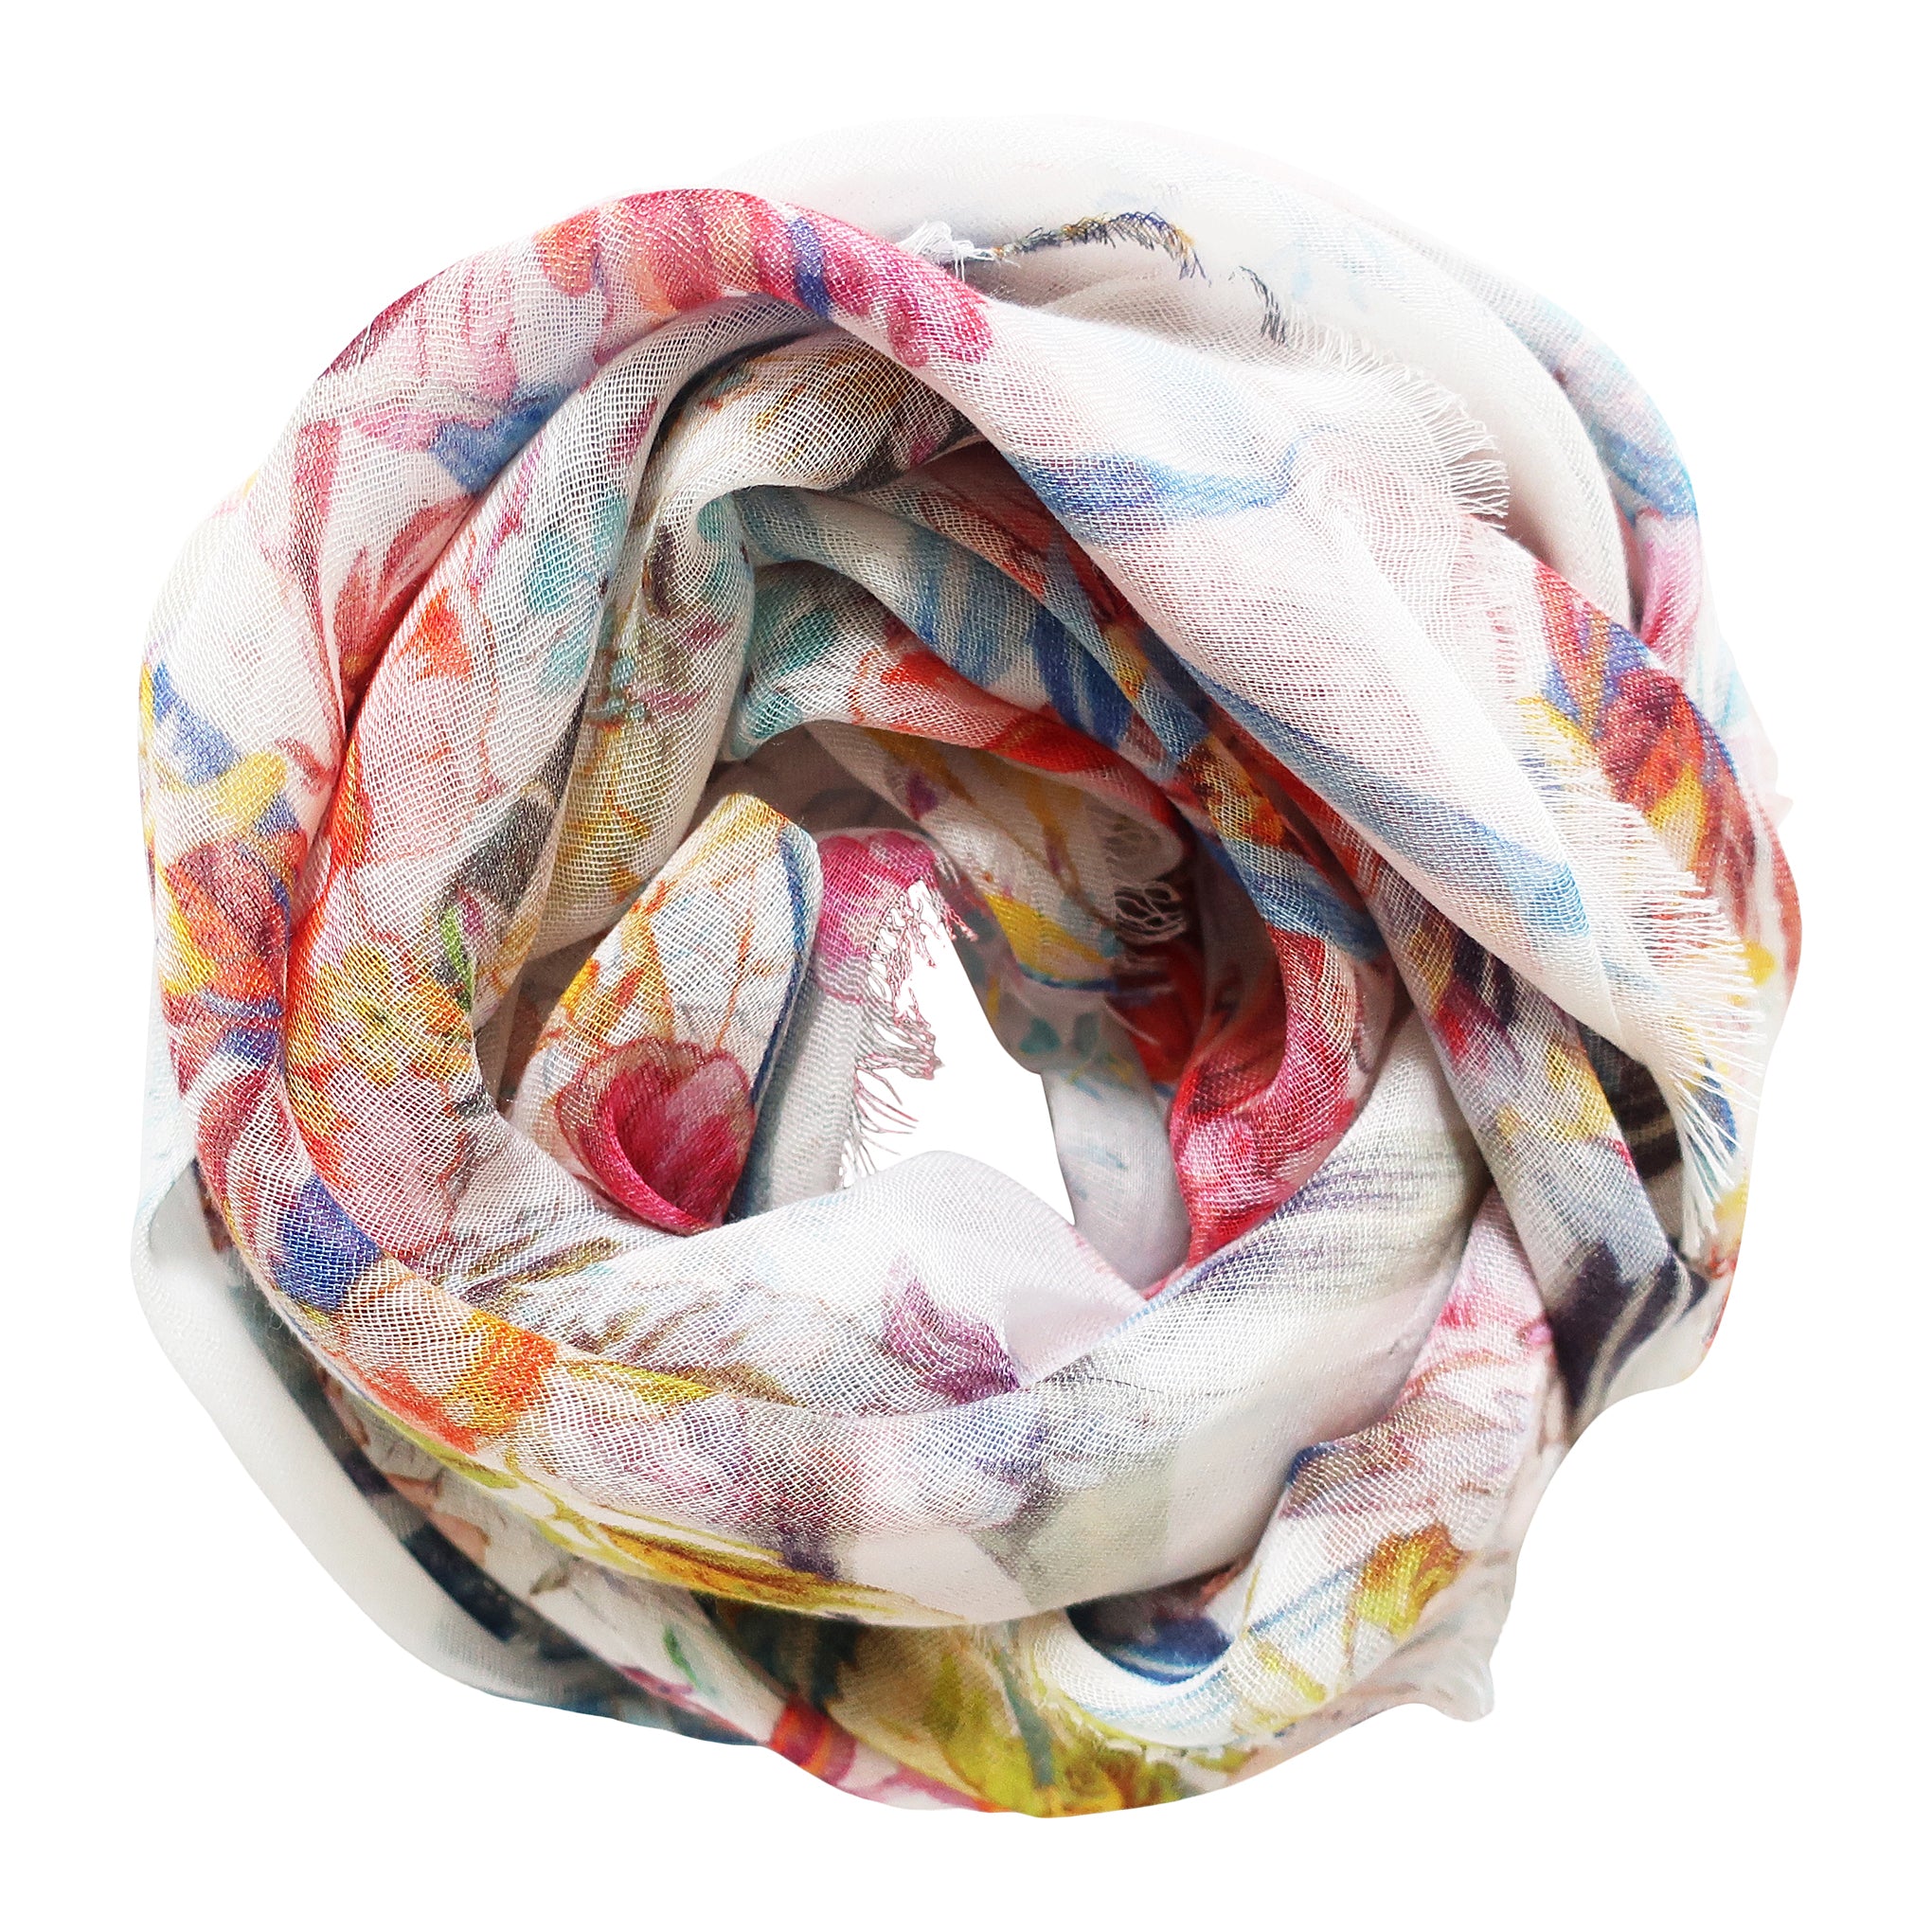 Blue Pacific English Colonial Neckerchief Scarf in Multicolor Floral and White